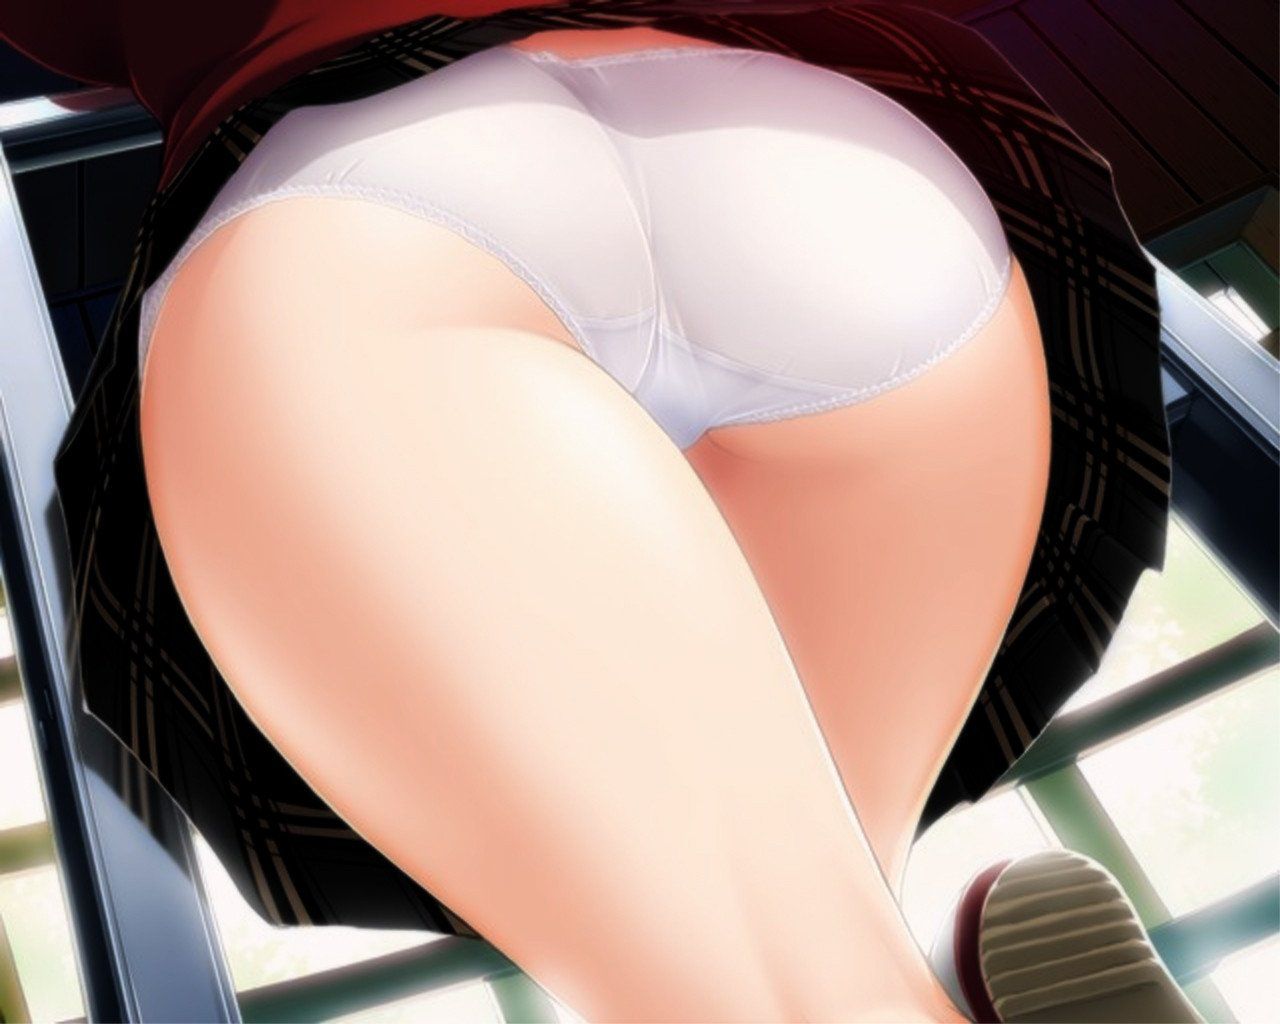 Erotic anime summary Erotic images seen up close such as ass and pants [secondary erotic] 13